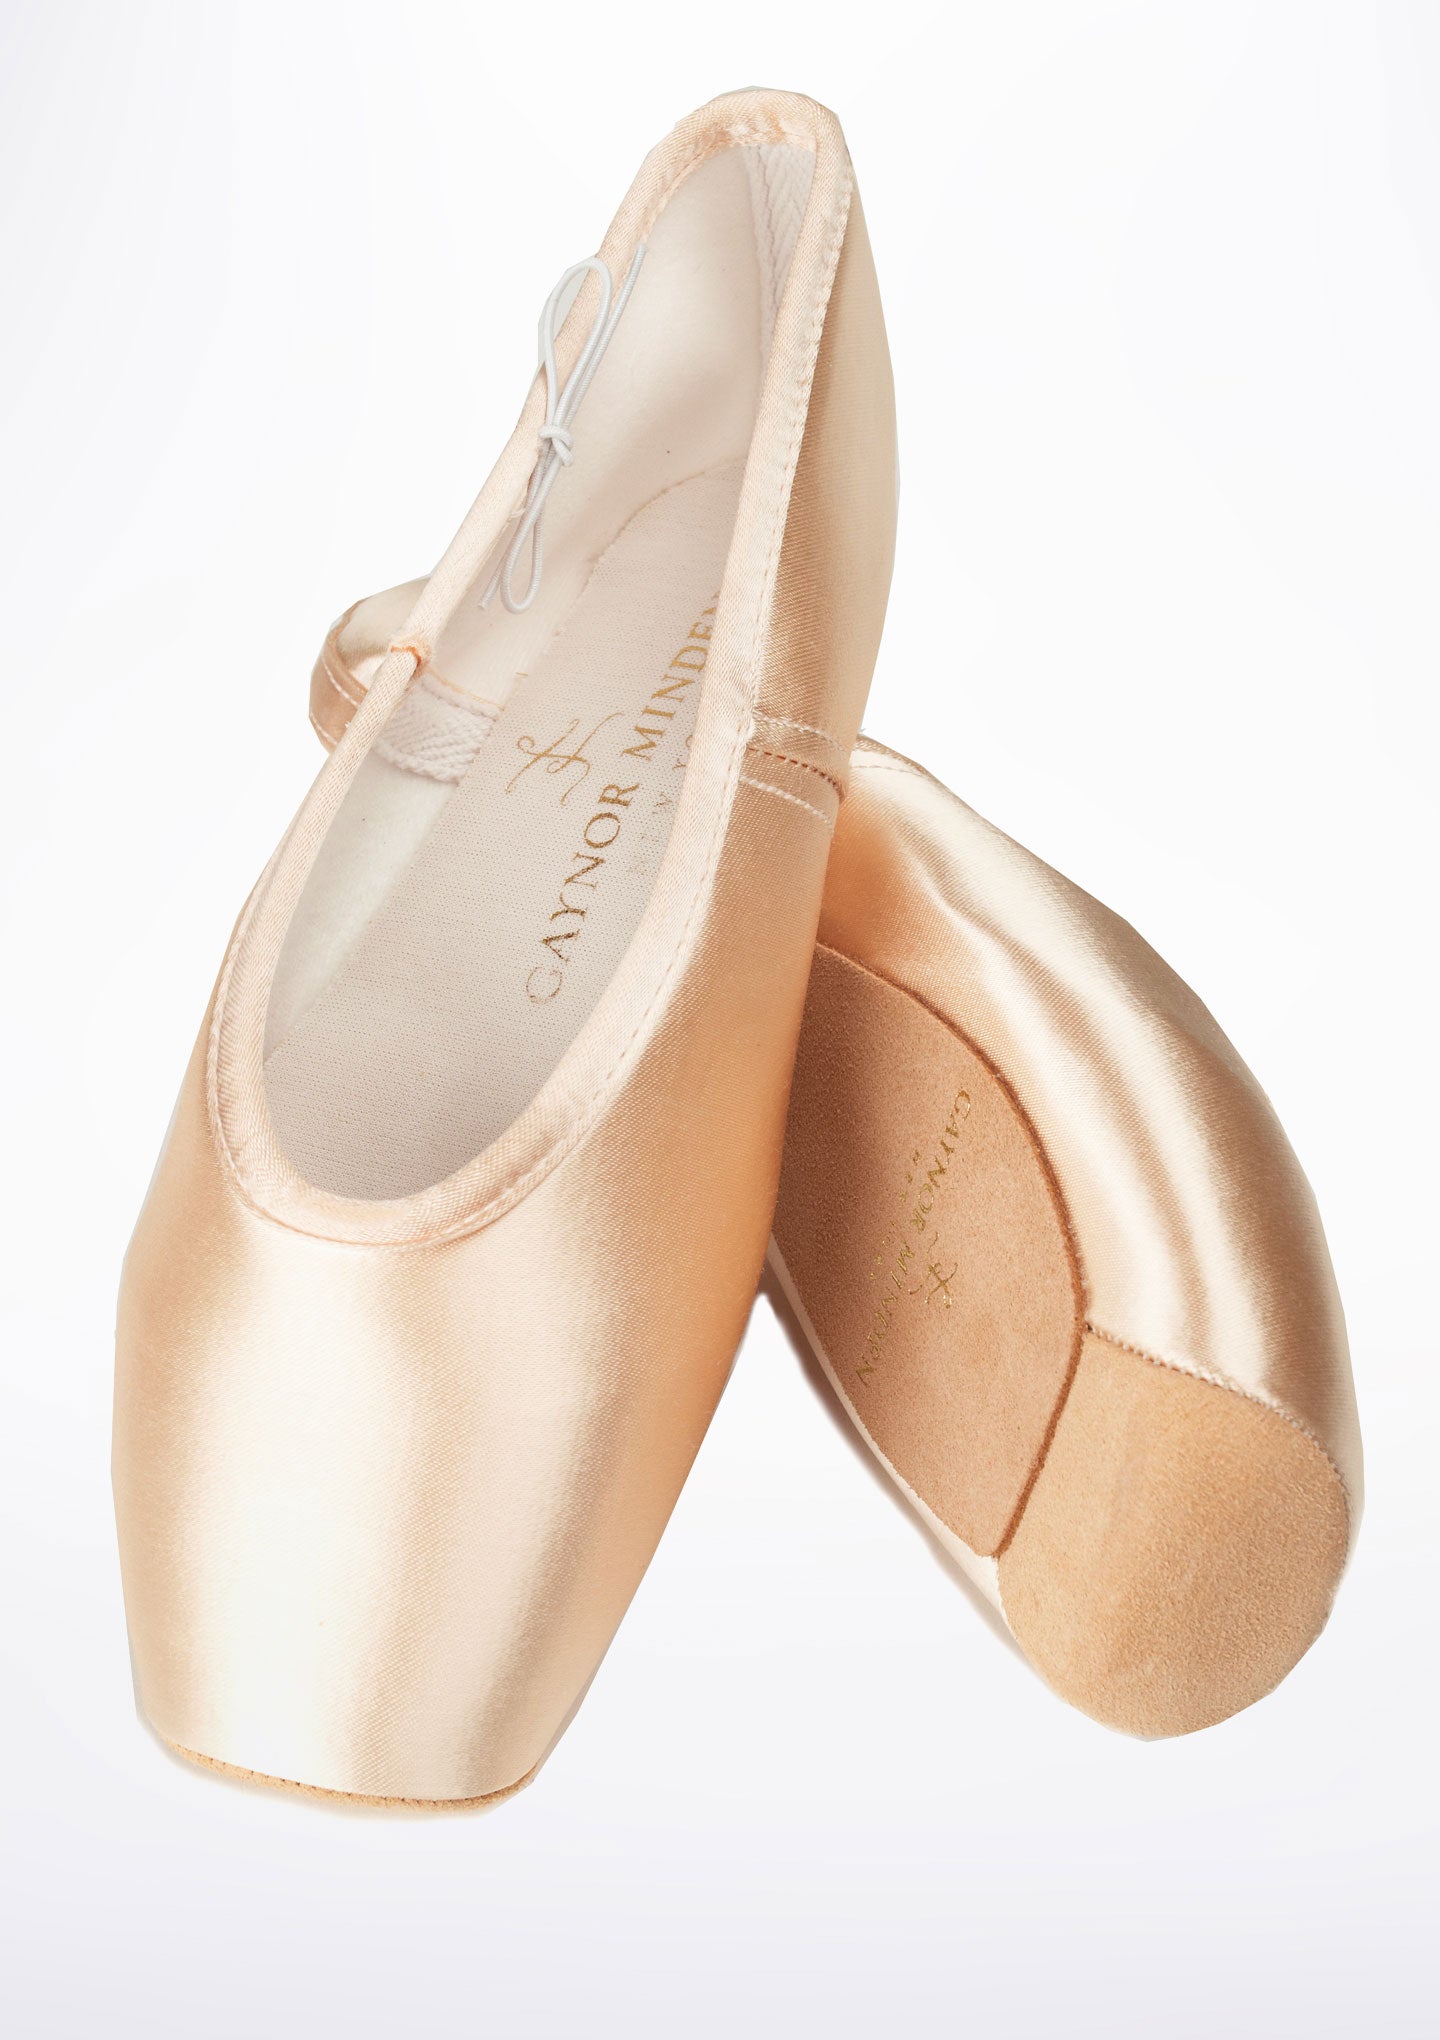 Gaynor Minden Pointe Shoe Classic (CL) 3+ Supple (S) Pink